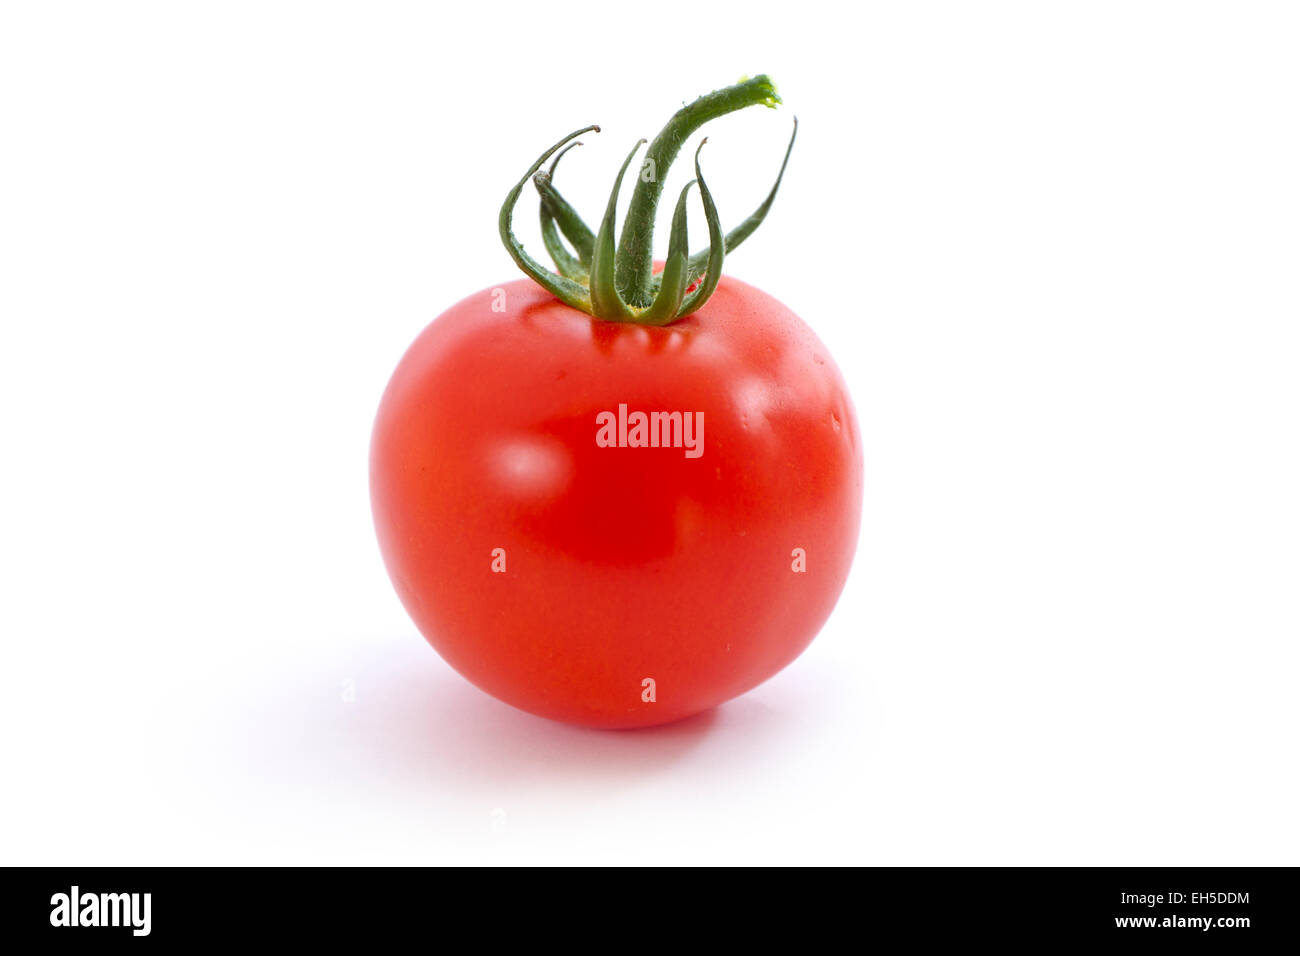 Side view of a fresh organic tomato on white background. Stock Photo